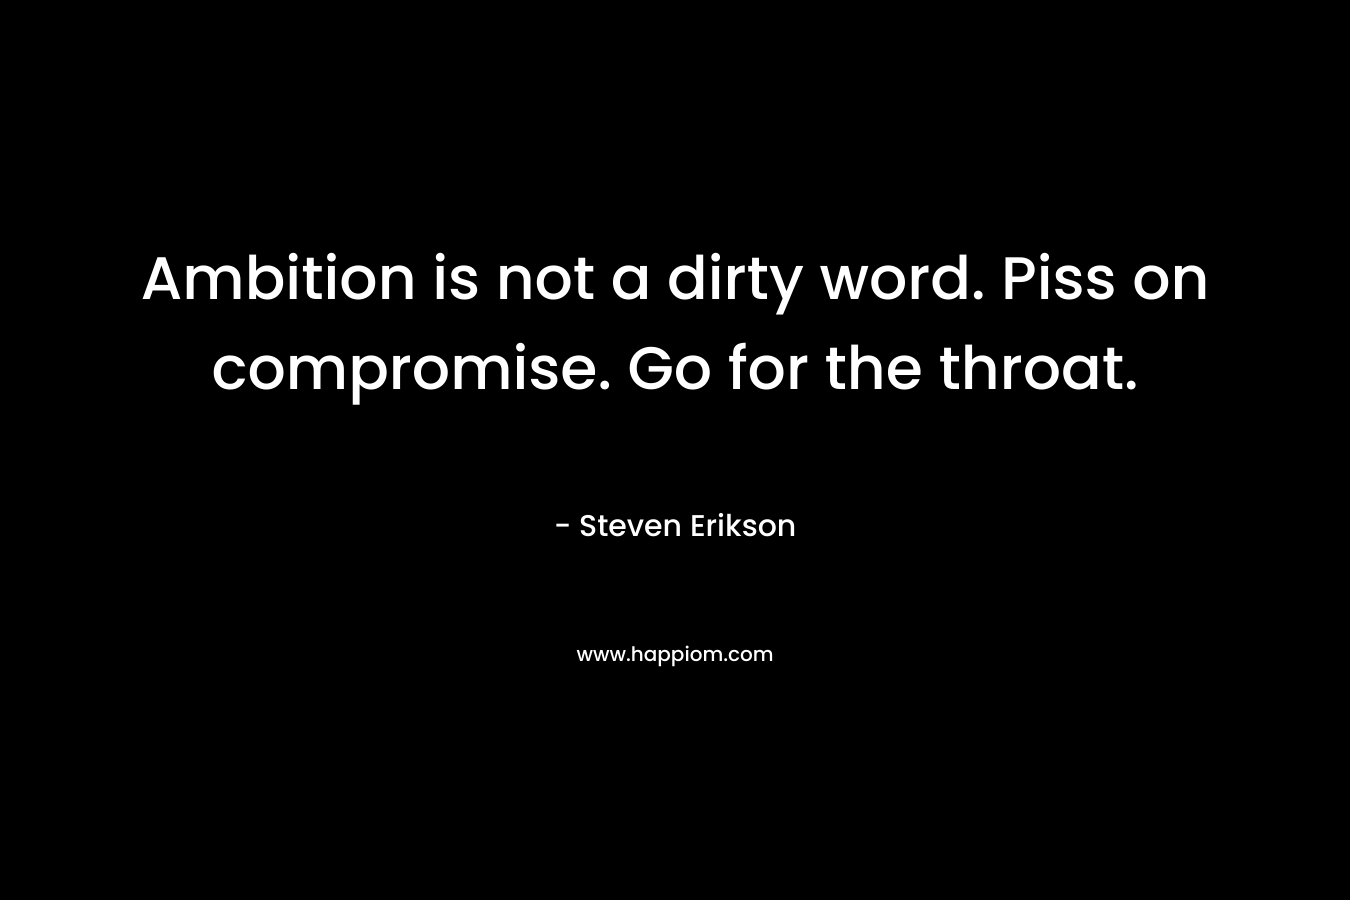 Ambition is not a dirty word. Piss on compromise. Go for the throat.